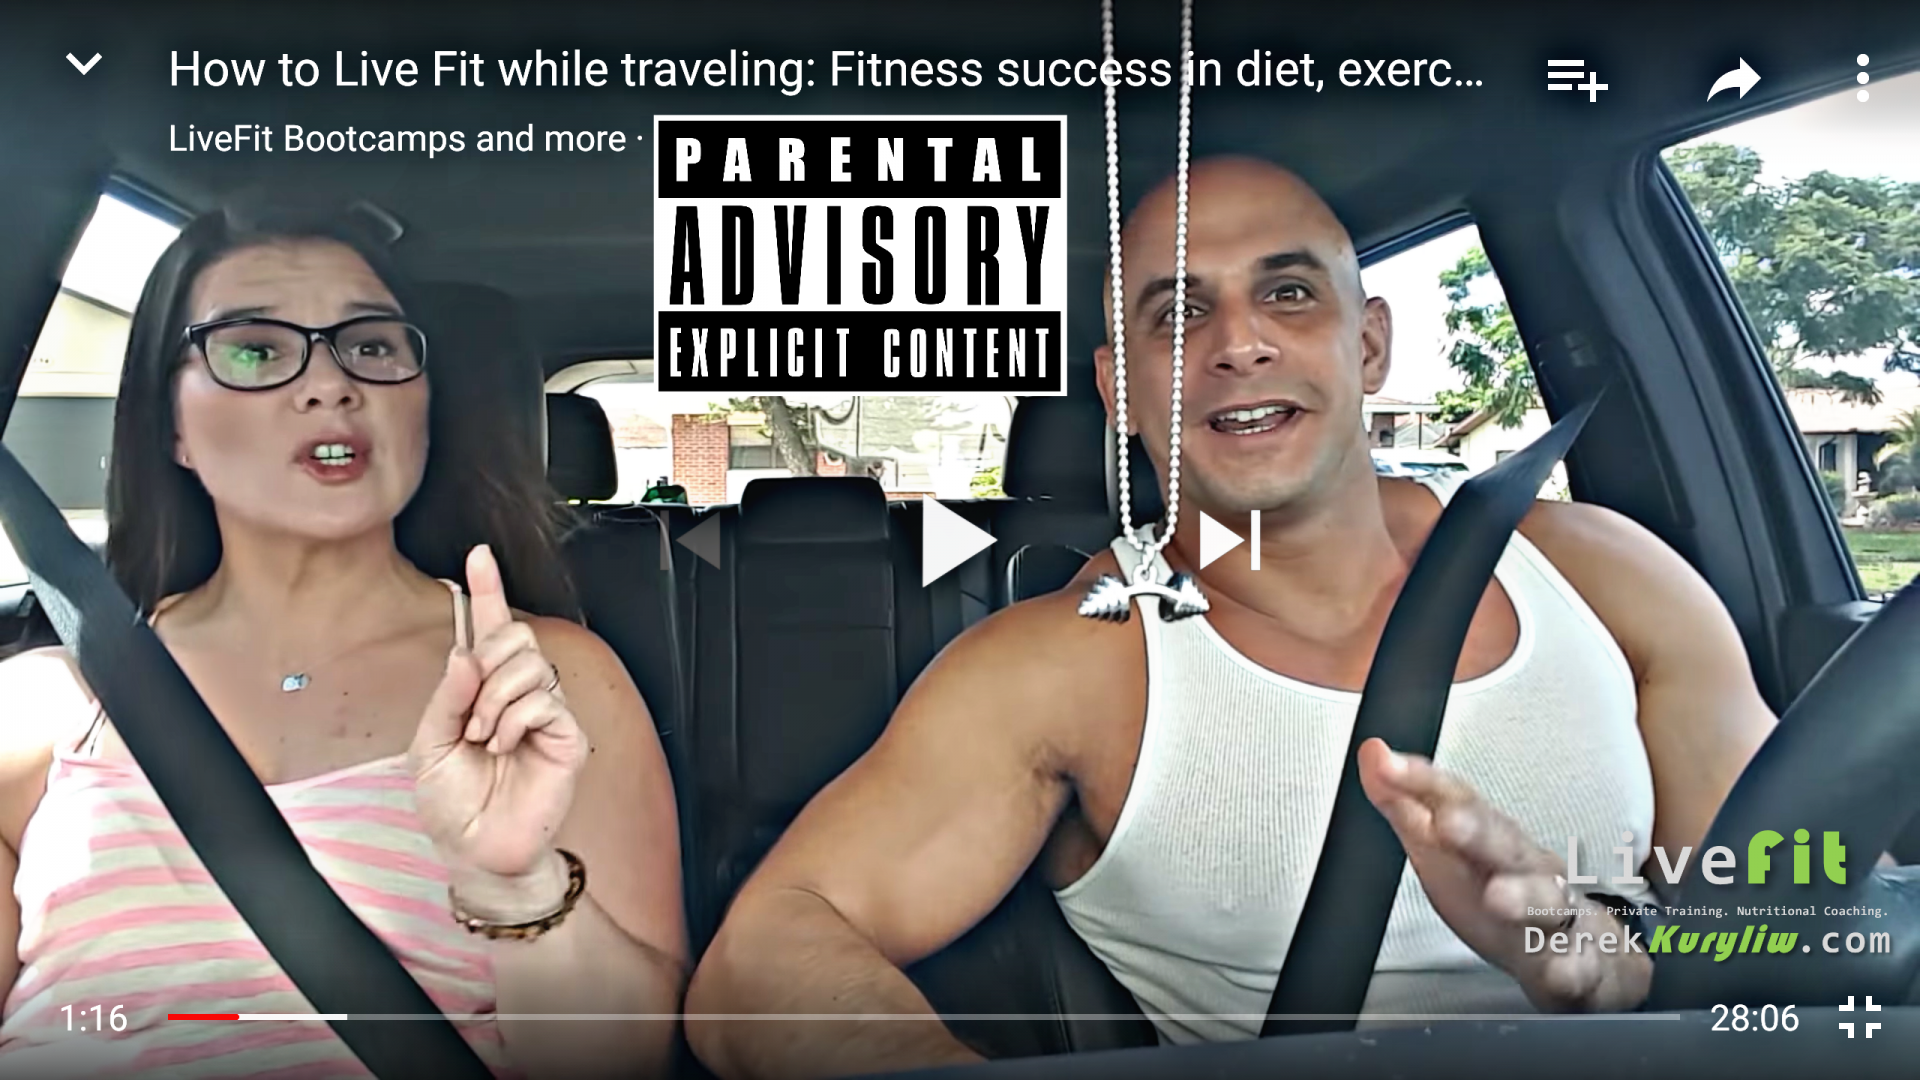 How to Live Fit while traveling: Fitness success in diet, exercise, packing and planning